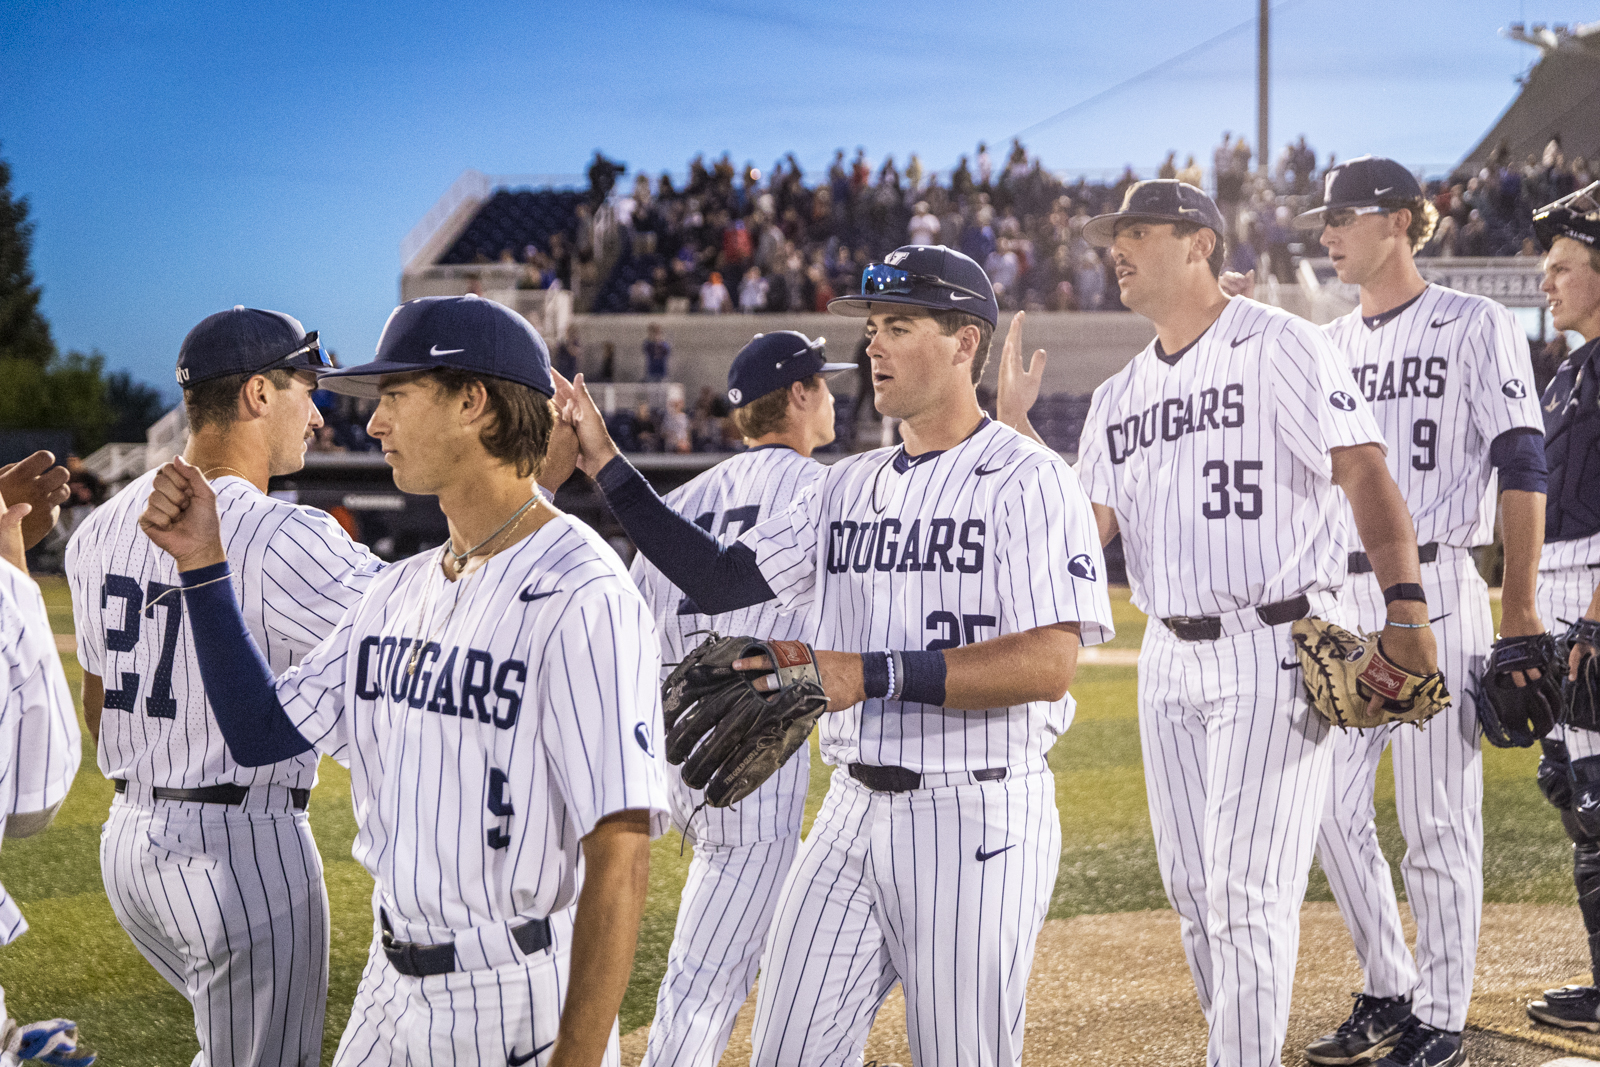 "We're playing for each other" — Redhot BYU baseball storms into WCC